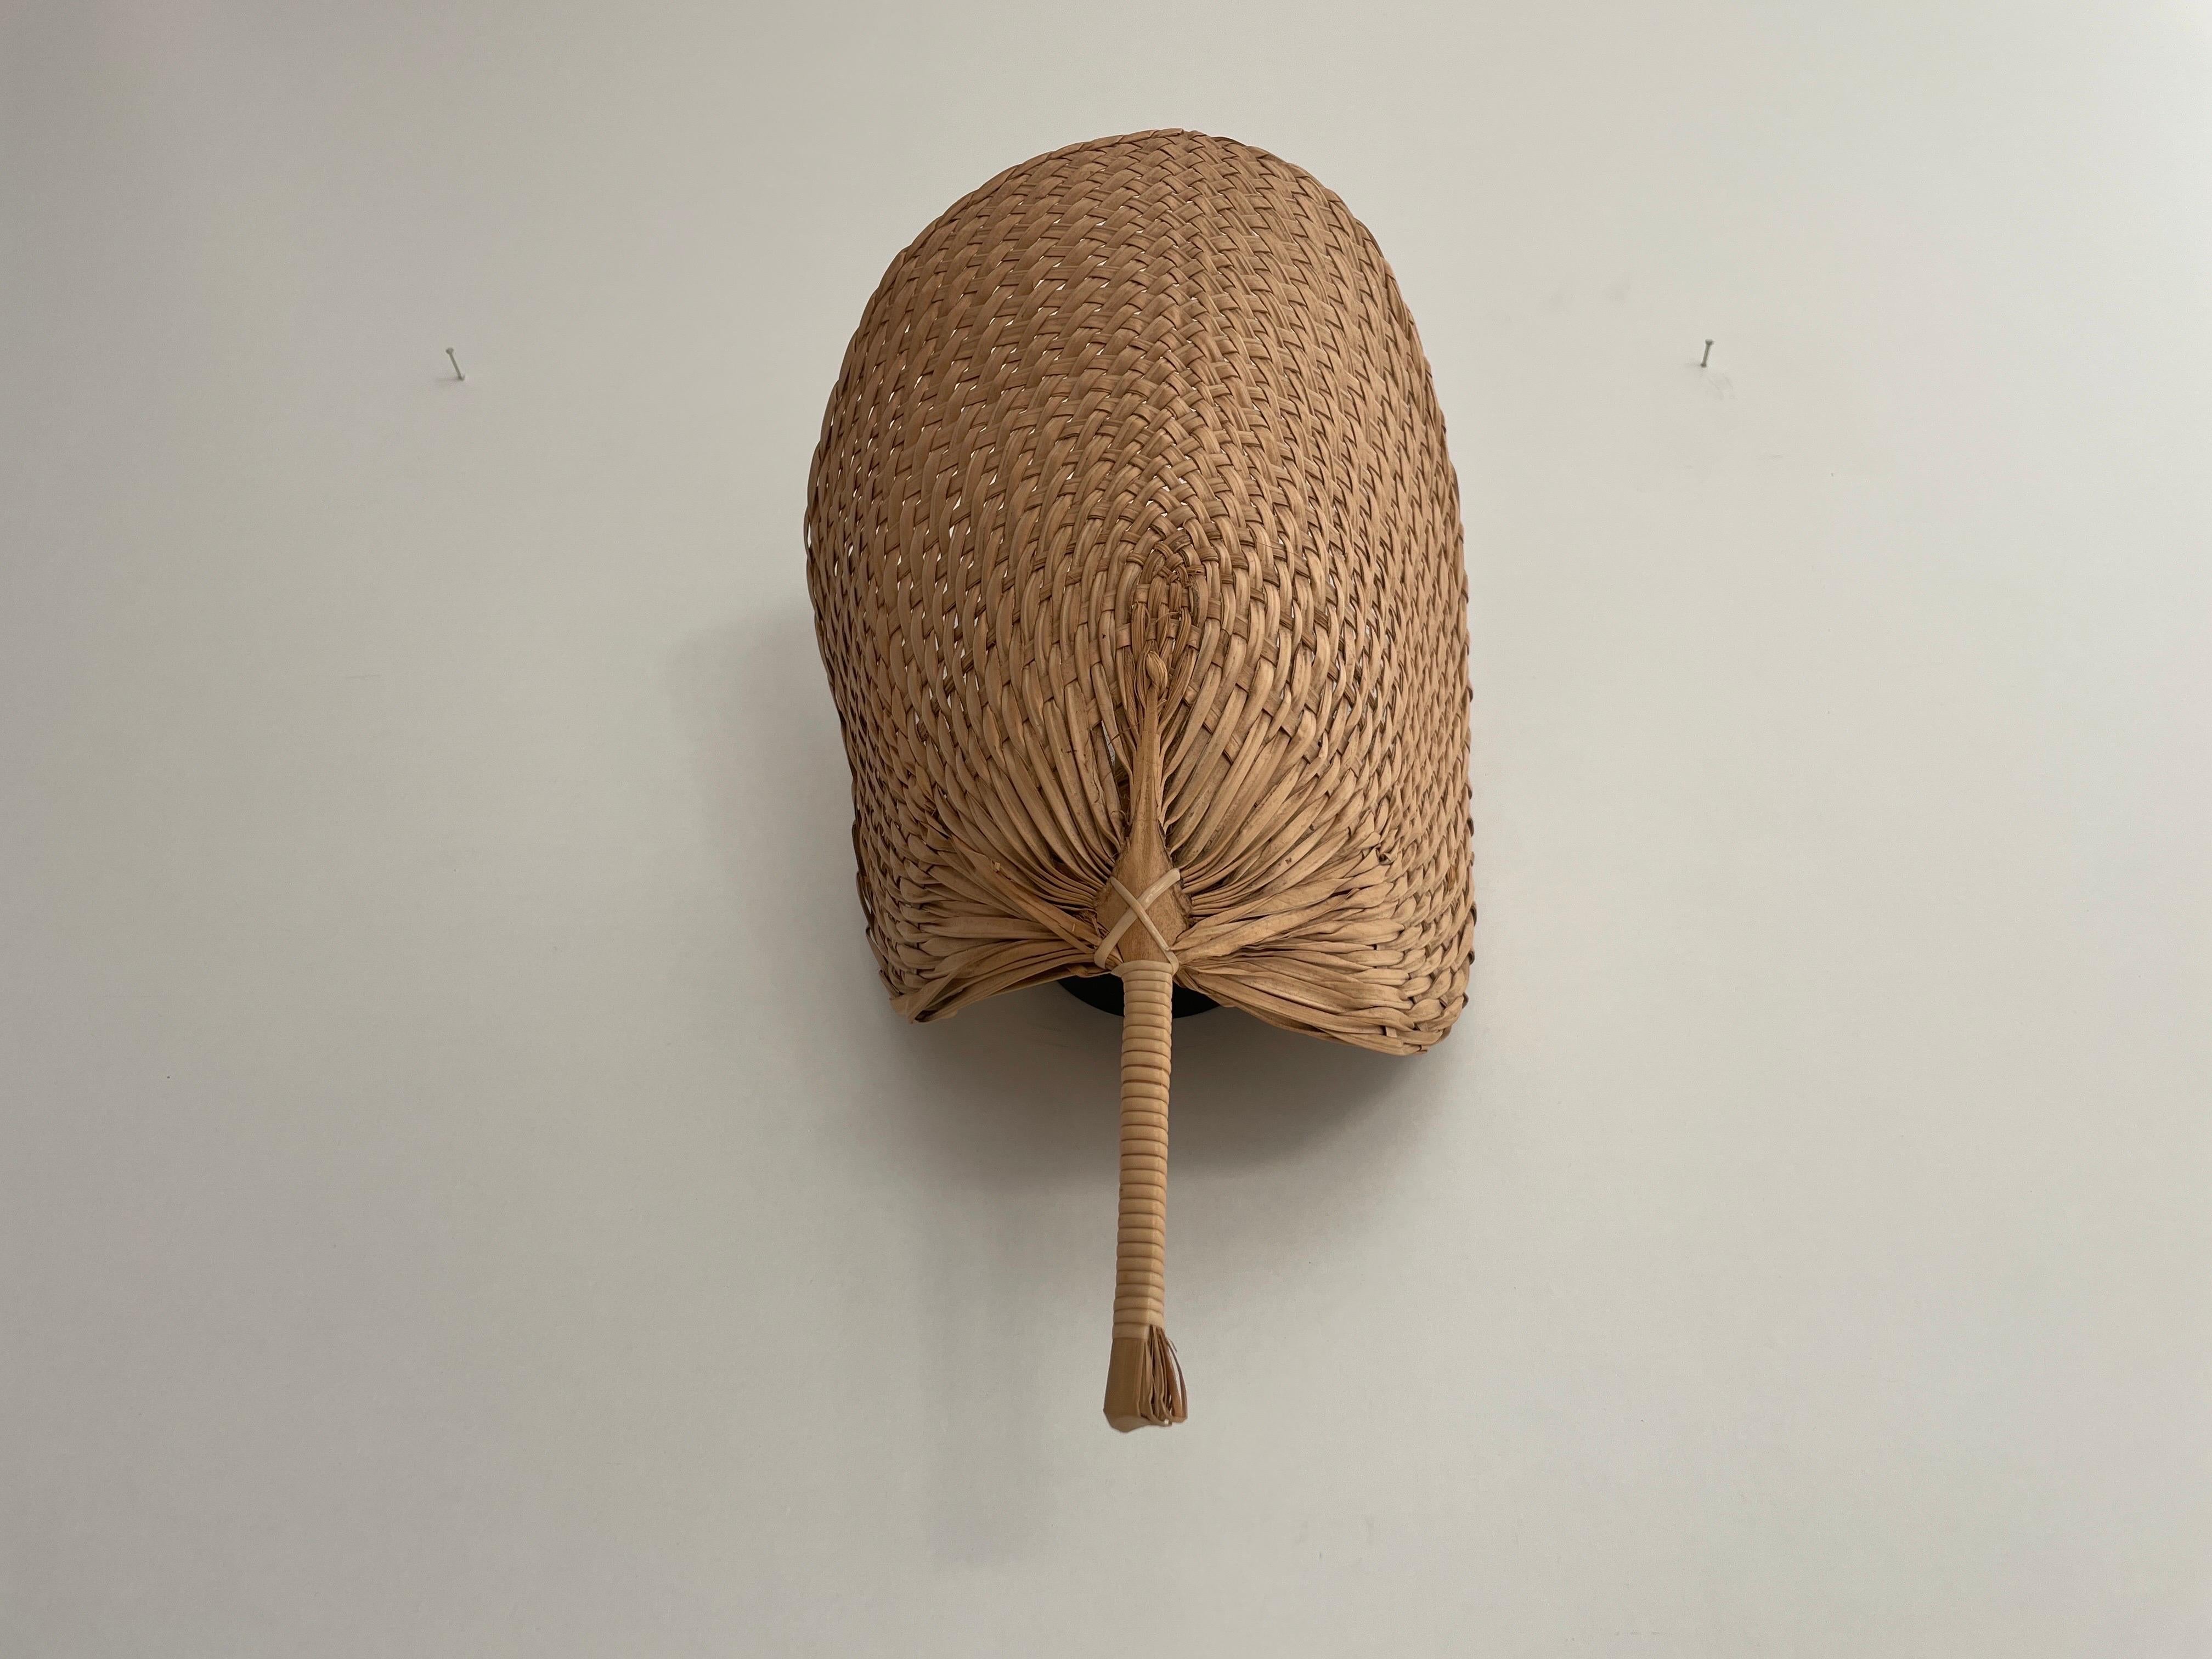 Mid-Century Modern Hand-woven Wicker Palmate Leaf Design Single Sconce, 1960s, Germany For Sale